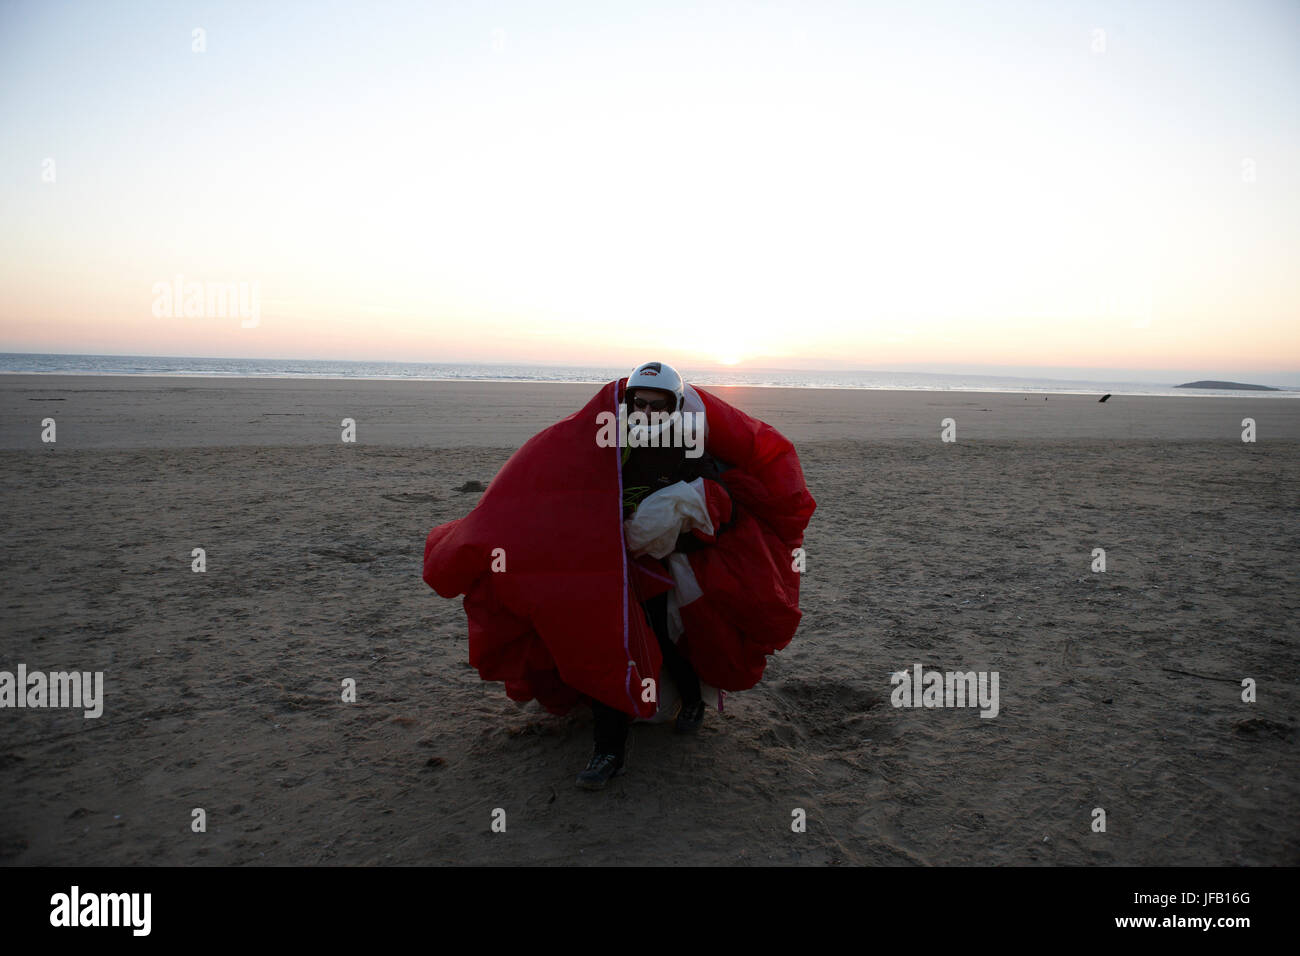 A Paraglider has landed on a beach at sunset, Stock Photo